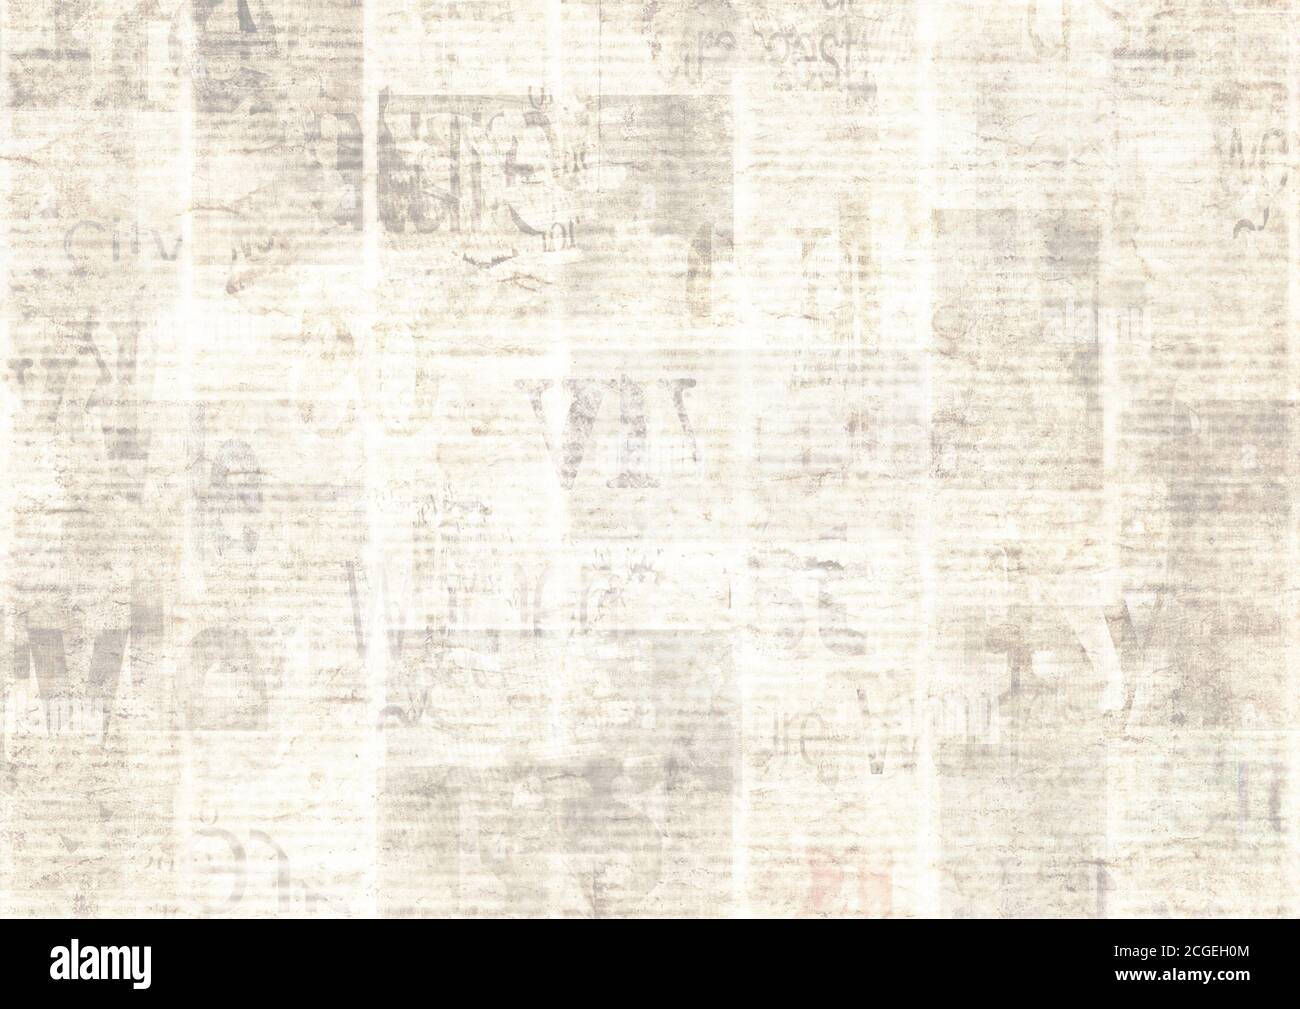 Newspaper with old unreadable text. Vintage grunge blurred paper news  texture horizontal background. Textured page. Gray collage. Front top view.  Zip